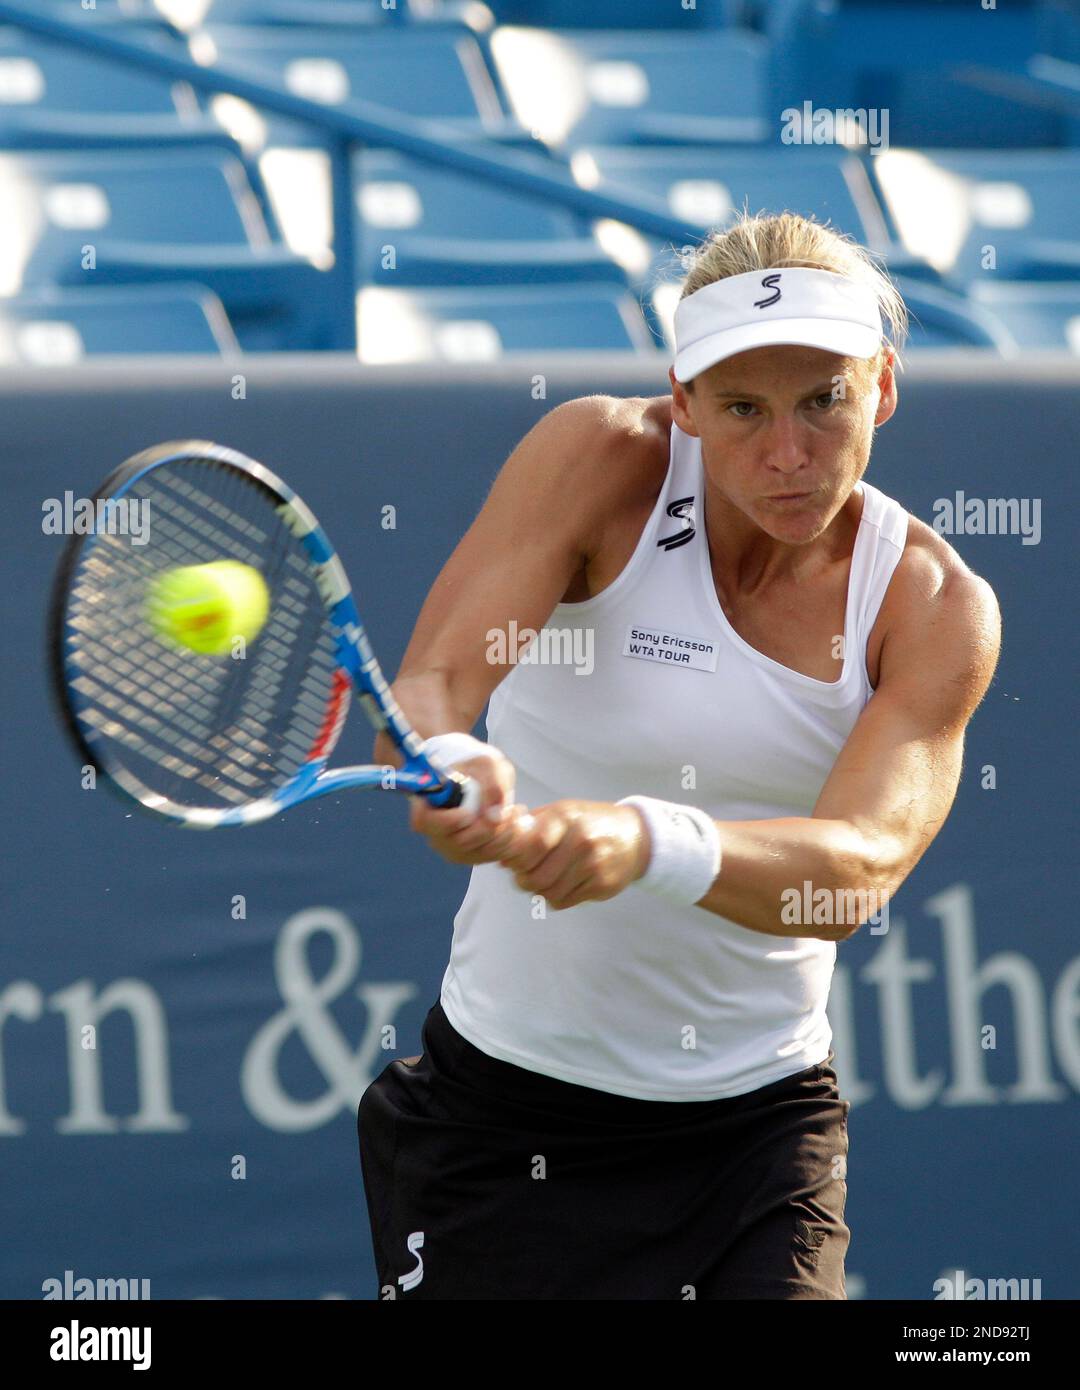 Sybille Bammer, from Austria, hits a forehand against Caroline Wozniacki,  from Denmark, during a match at the Cincinnati Open tennis tournament,  Wednesday, Aug. 11, 2010, in Mason, Ohio. (AP Photo/Al Behrman Stock